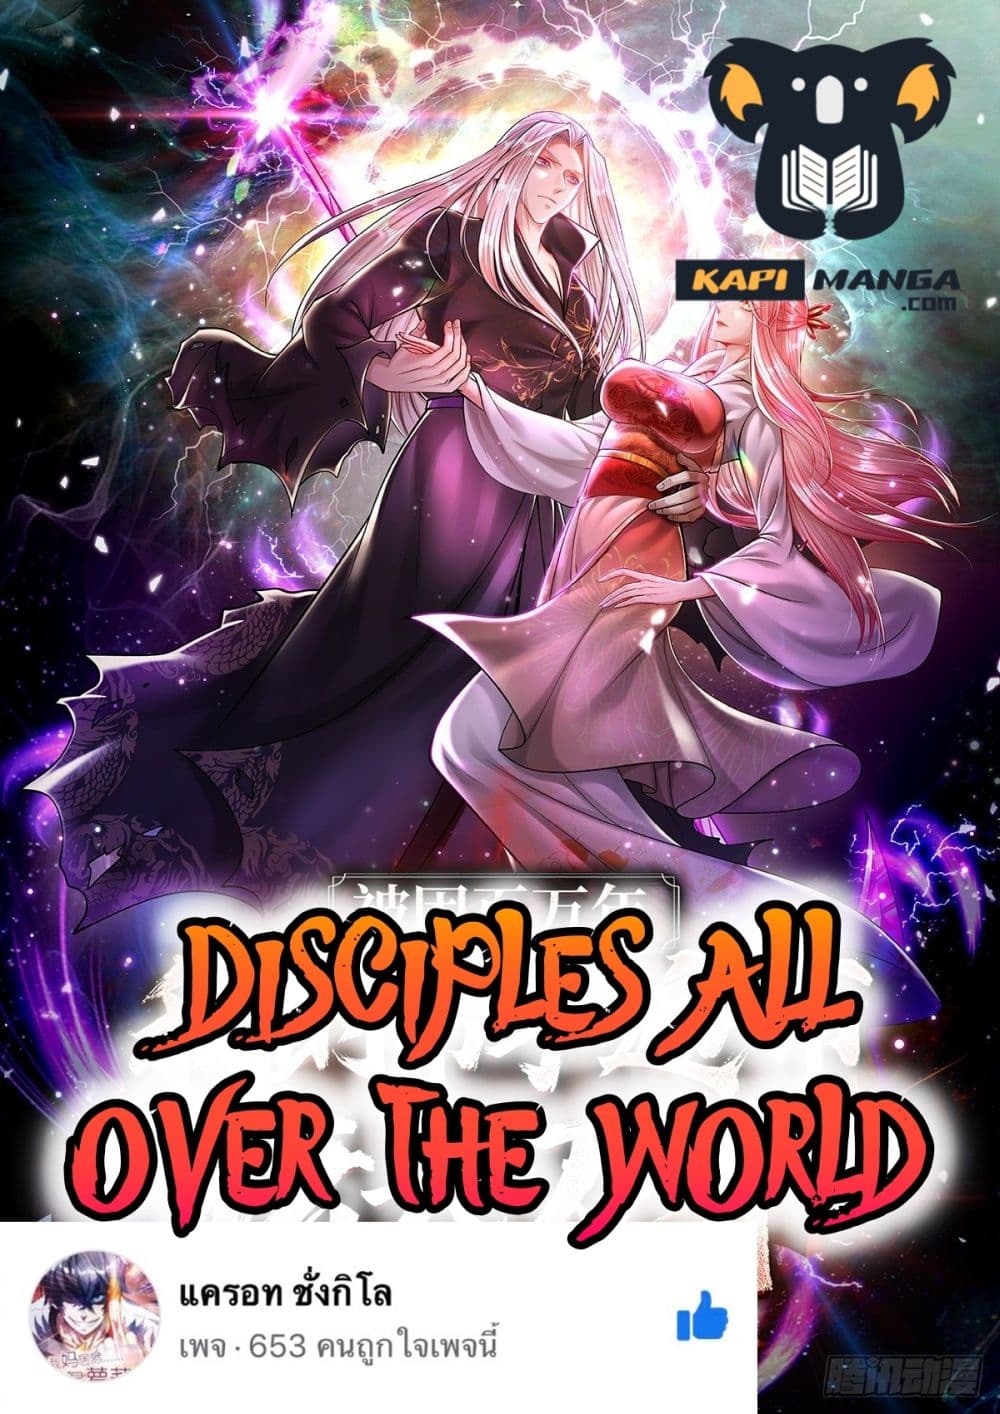 Disciples All Over the World à¸à¸­à¸à¸à¸µà¹ 59 (1)